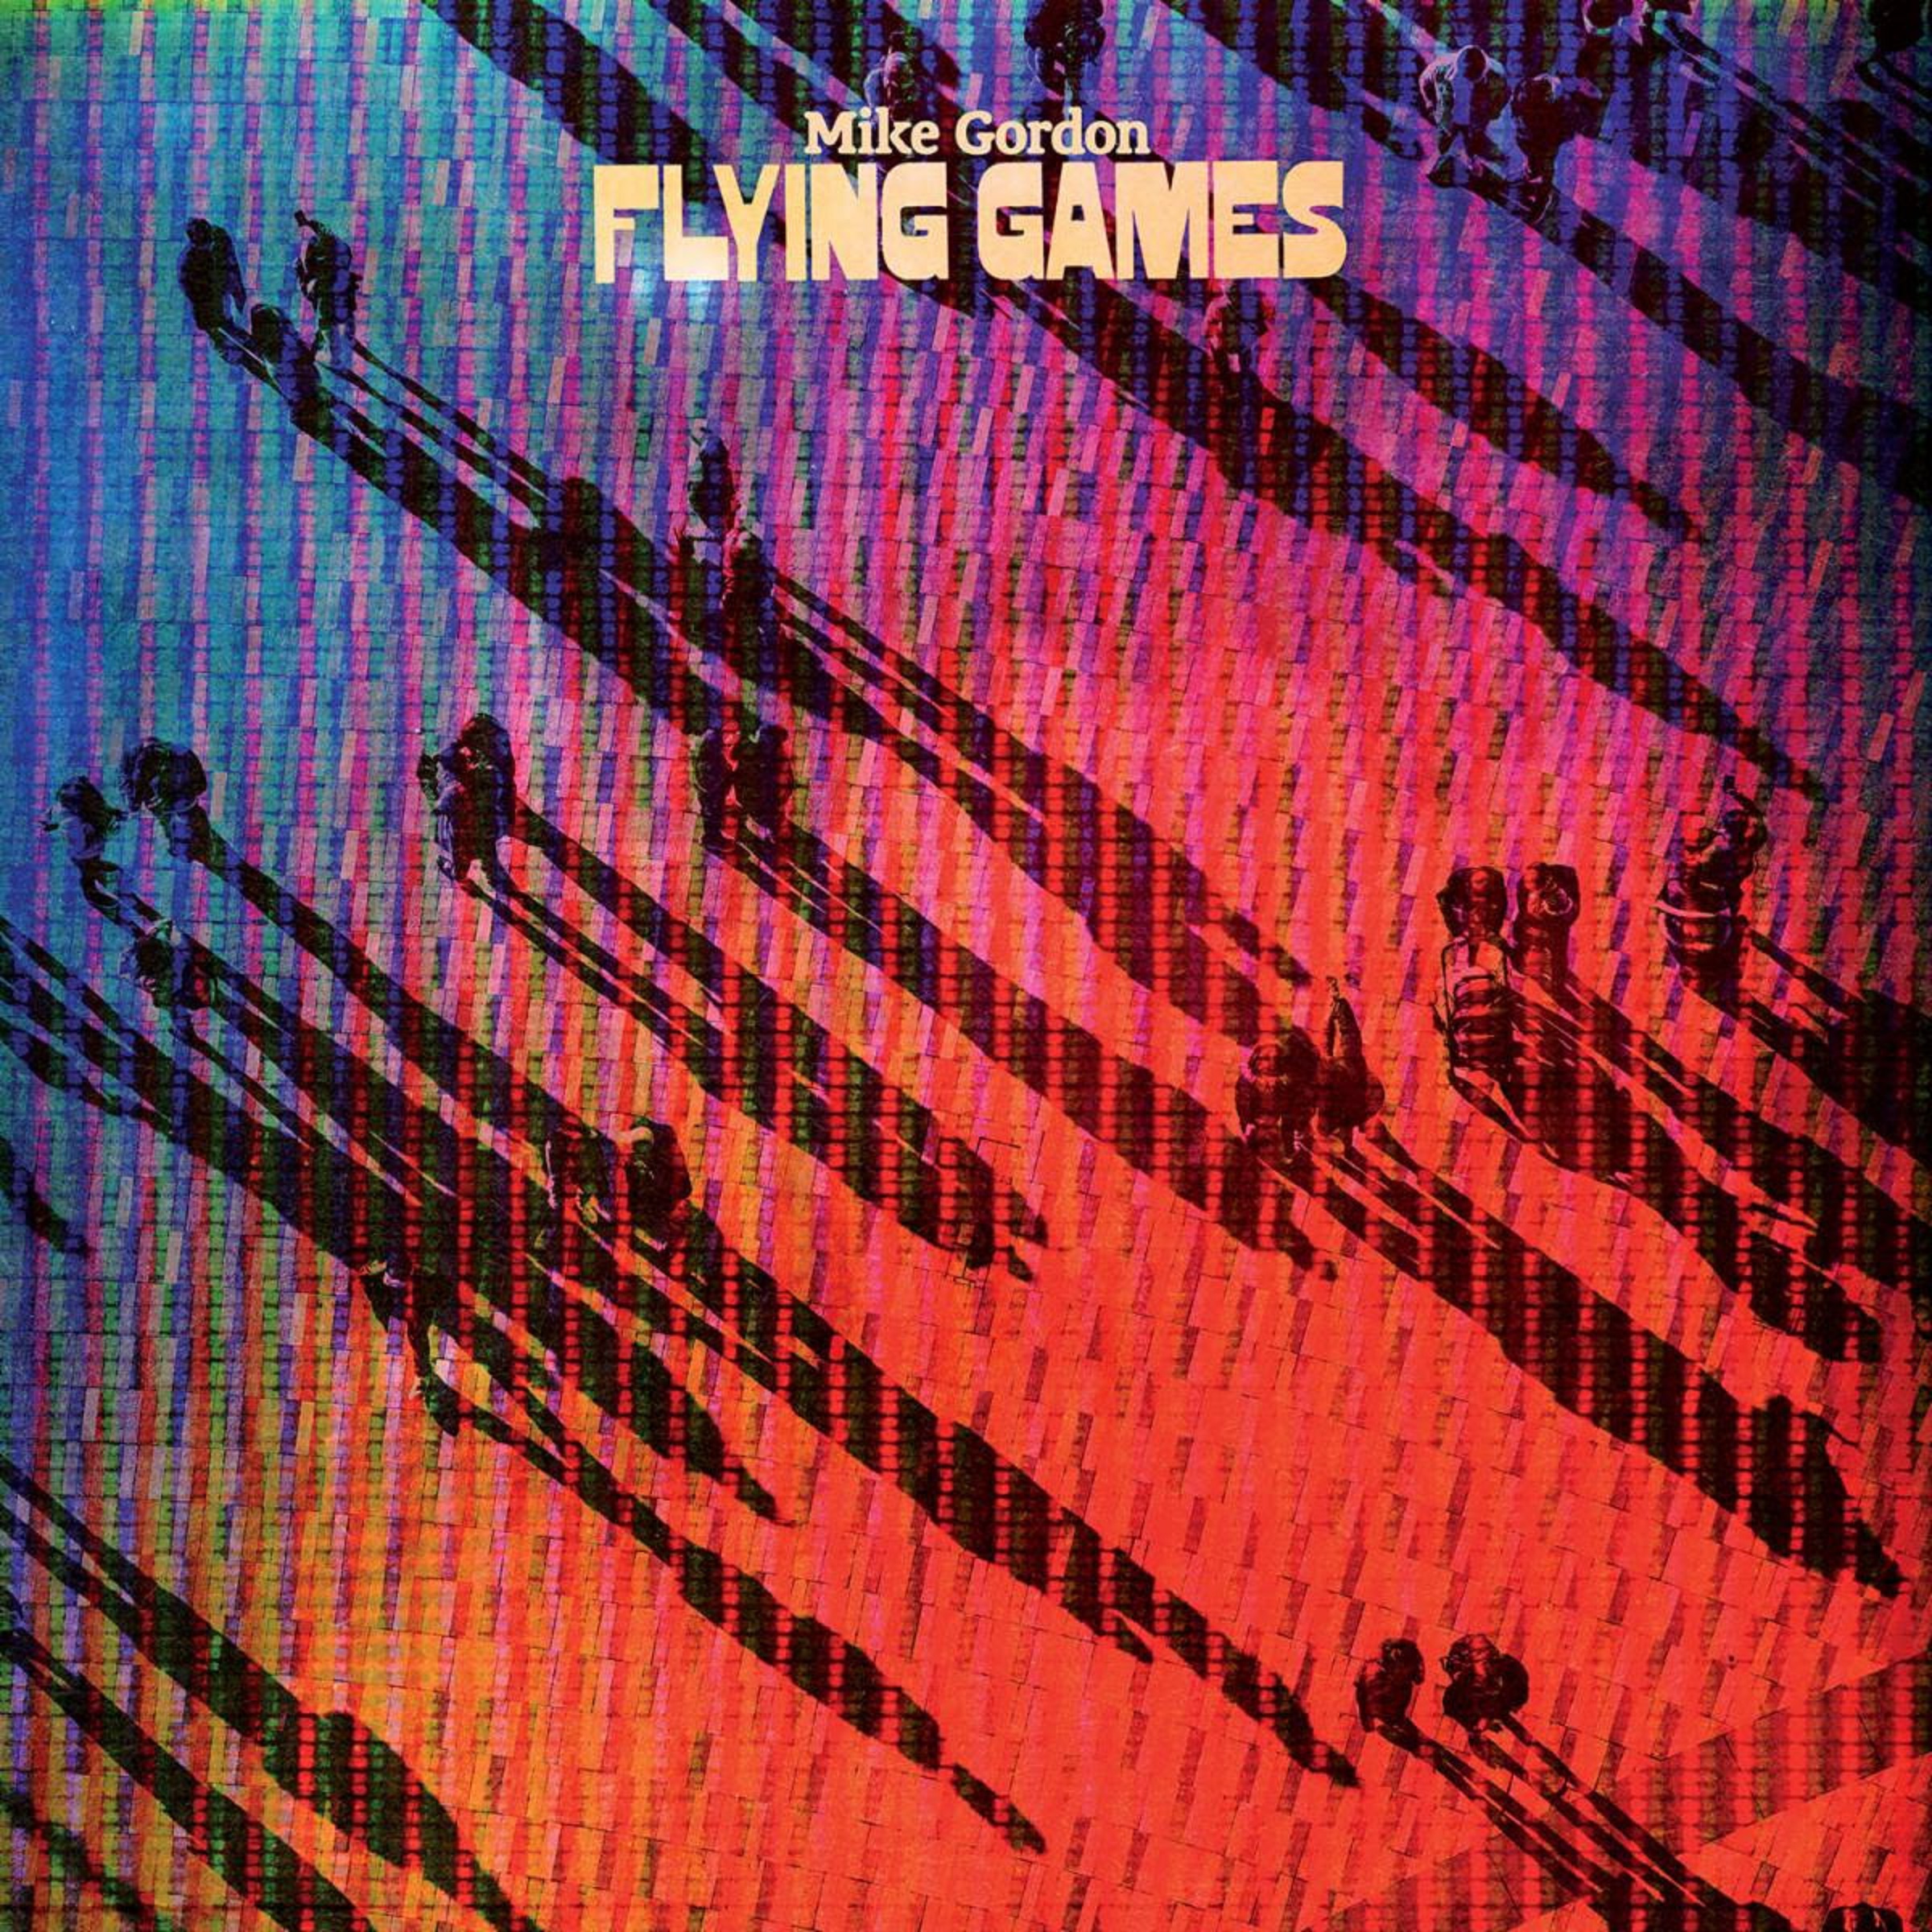 MIKE GORDON RELEASES NEW SOLO ALBUM, FLYING GAMES